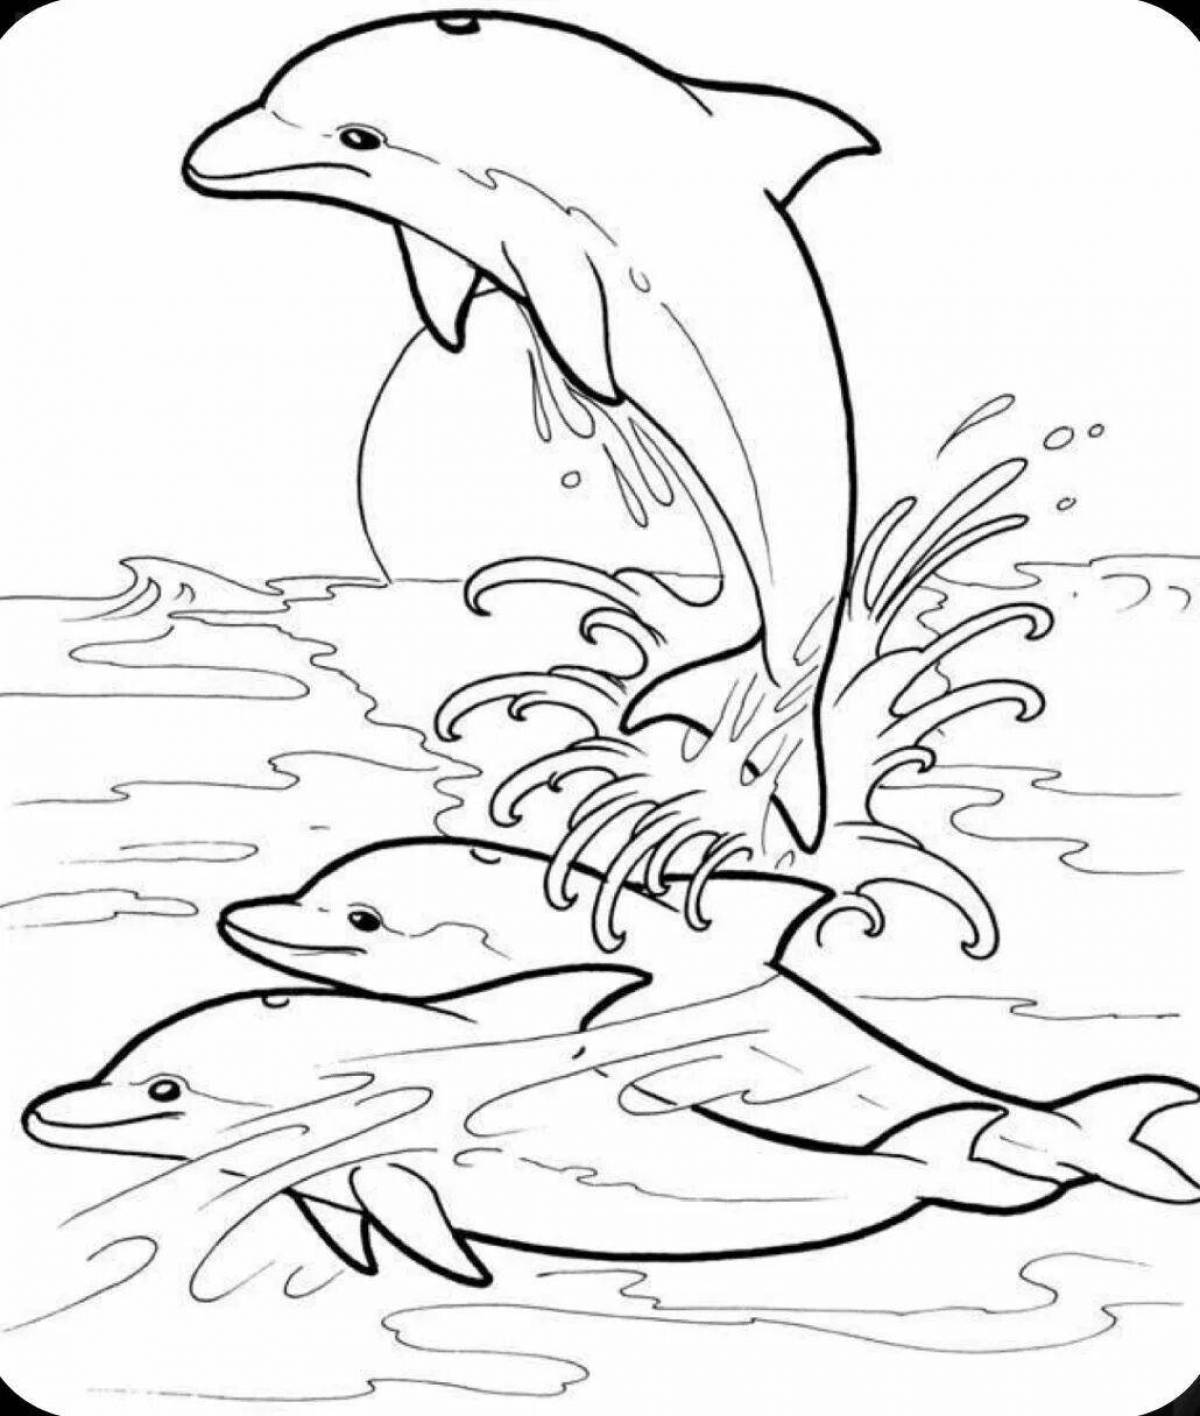 Amazing axalotic coloring page